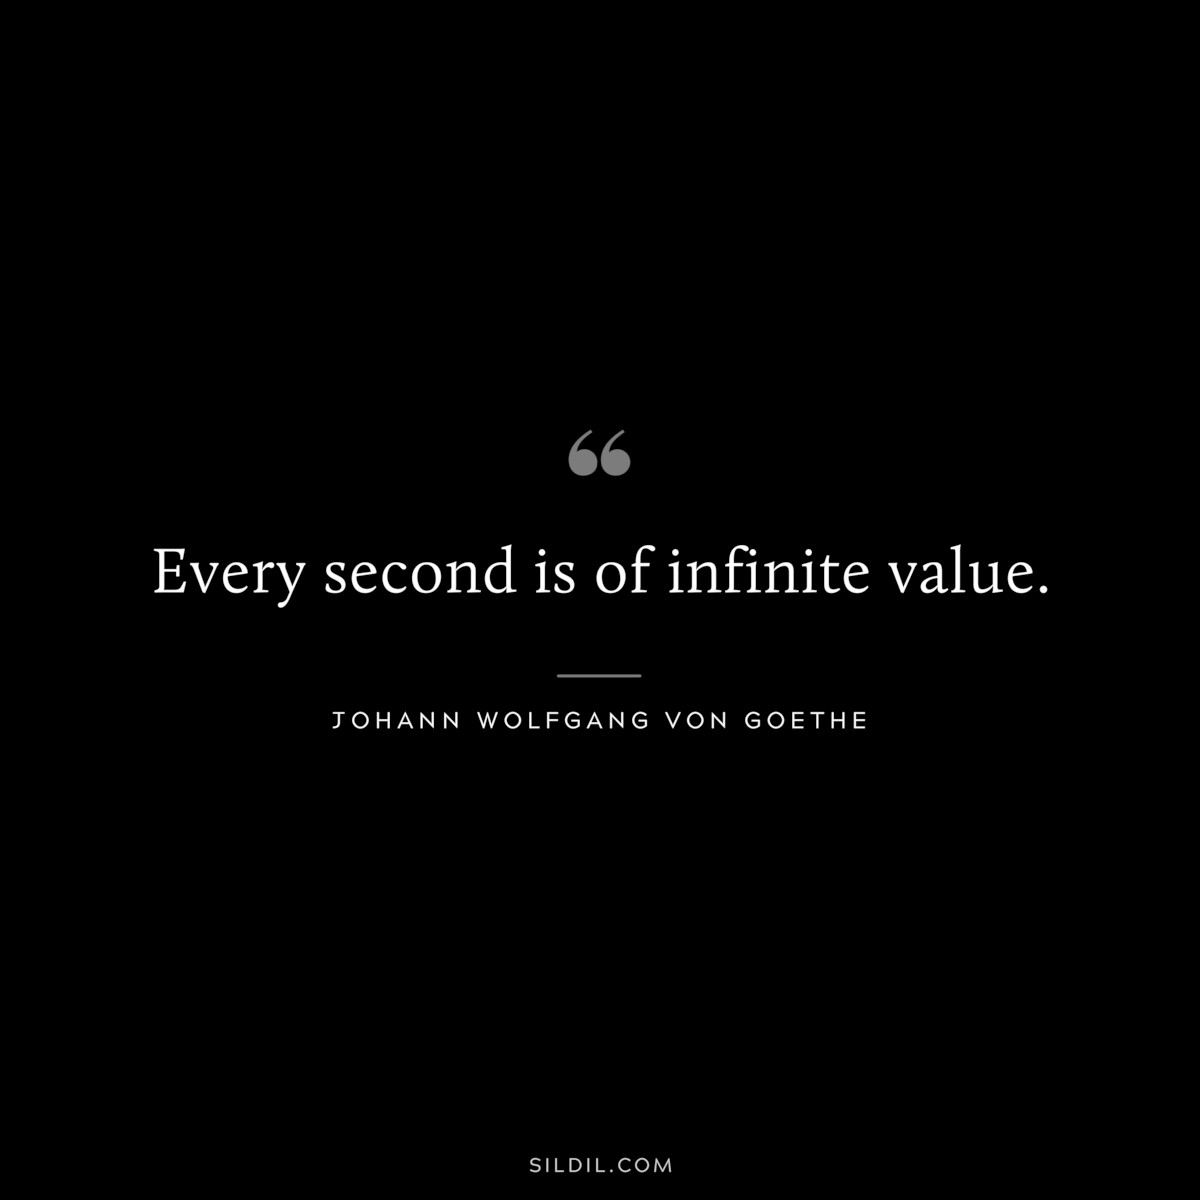 Every second is of infinite value.― Johann Wolfgang von Goethe